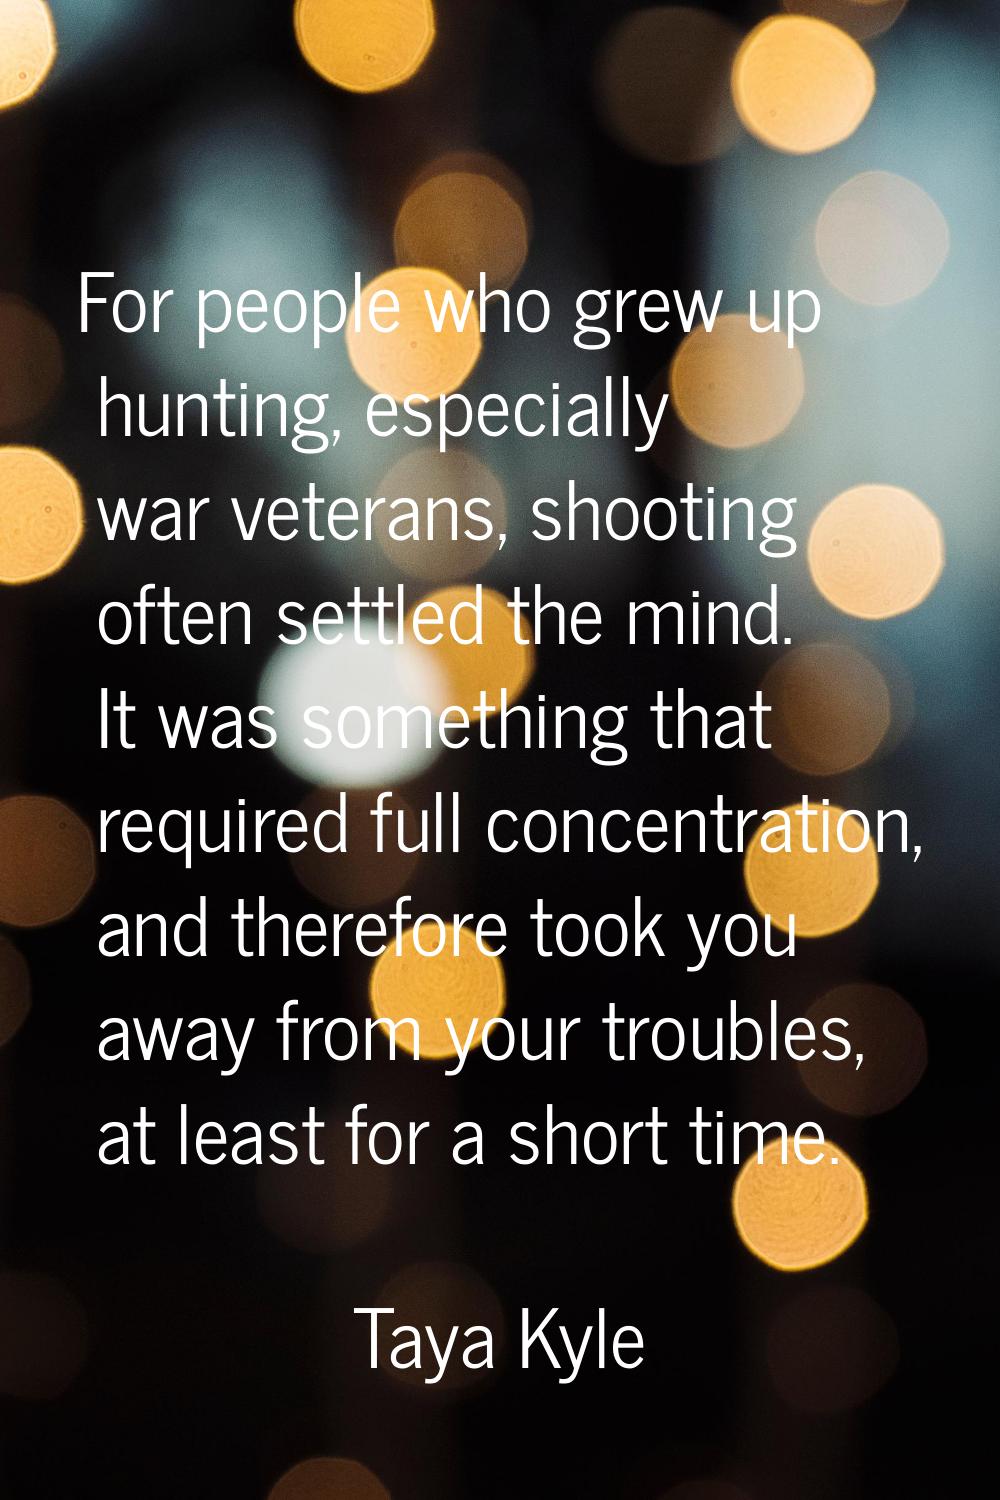 For people who grew up hunting, especially war veterans, shooting often settled the mind. It was so